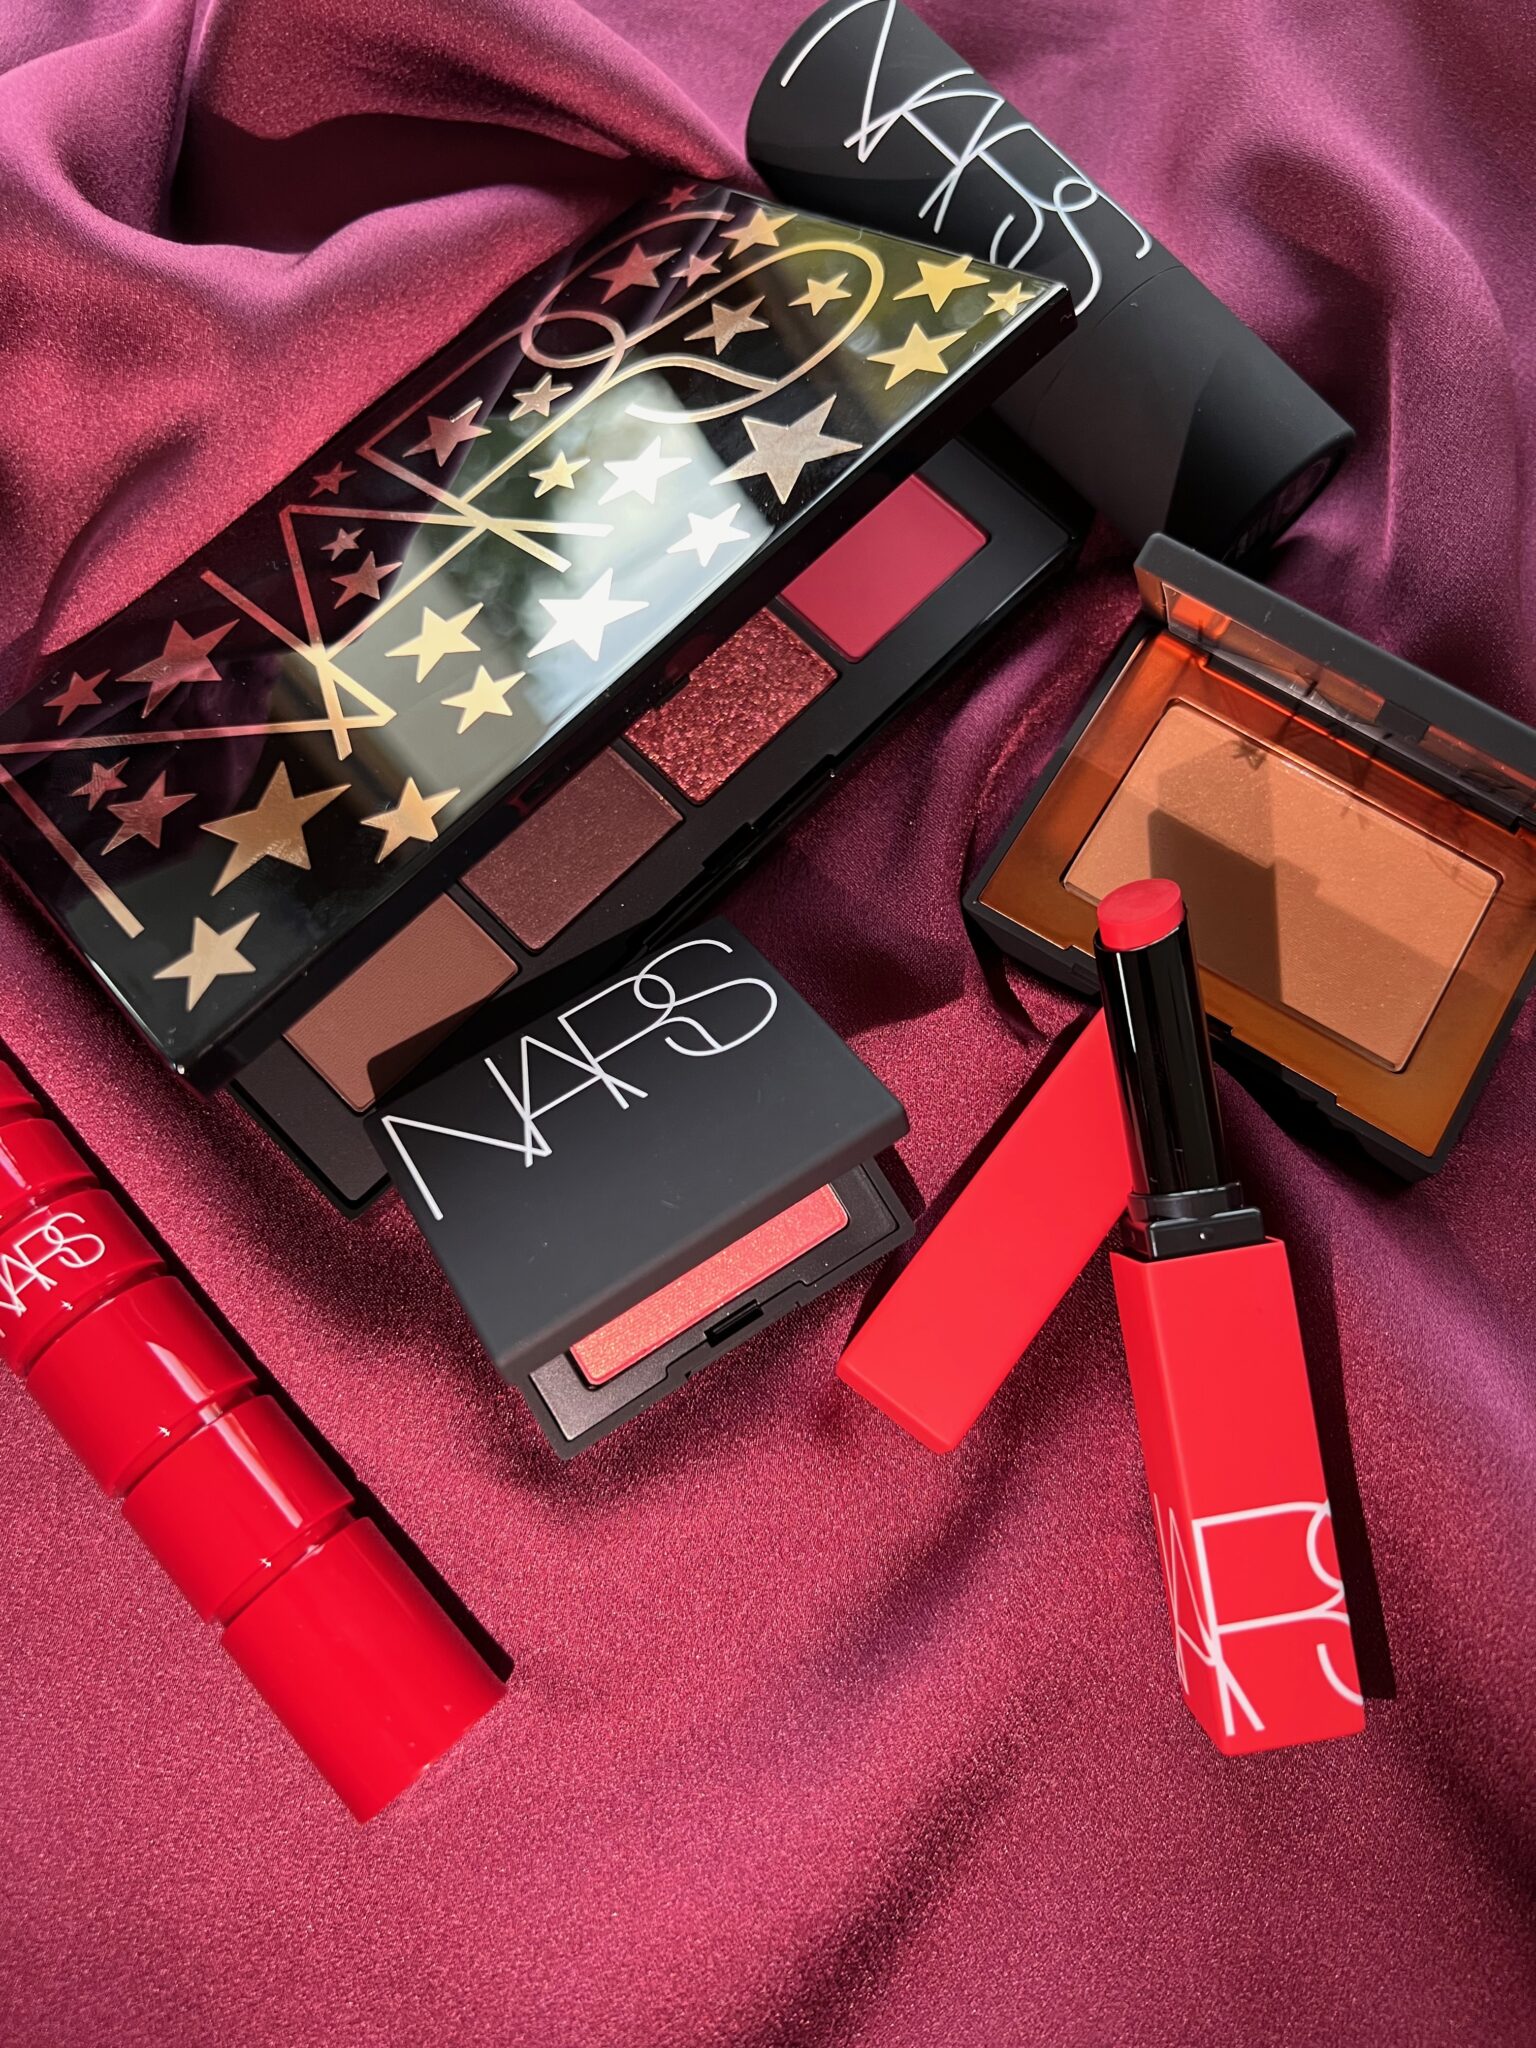 Christmas at Sephora - Top Holiday 2022 Gift Sets For Women. Nars, Sephora, Benefit and more. 3